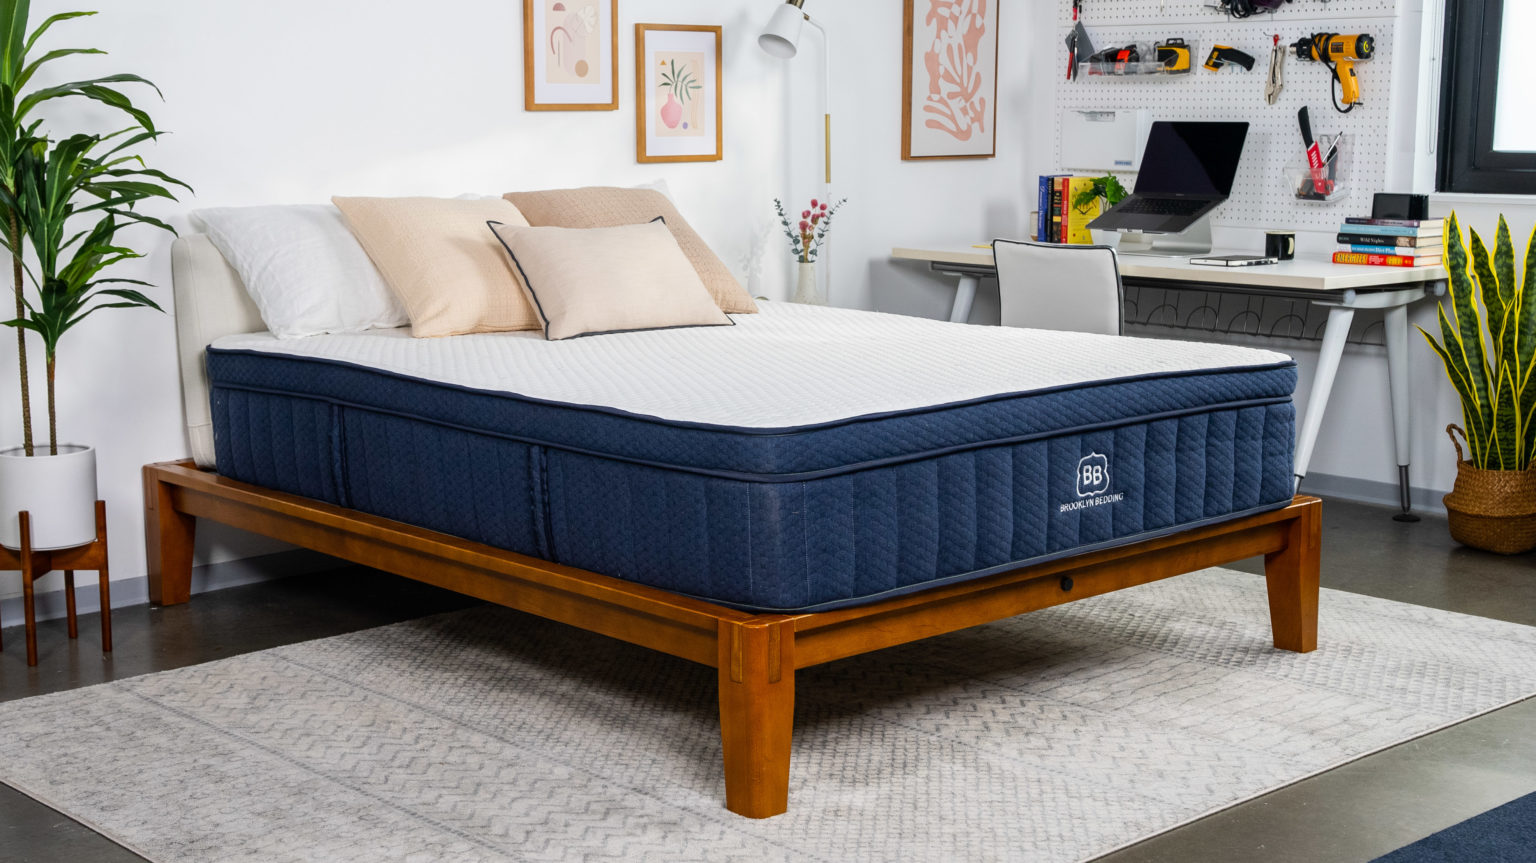 5 Main Things You Should Know Before Buying A Mattress 31